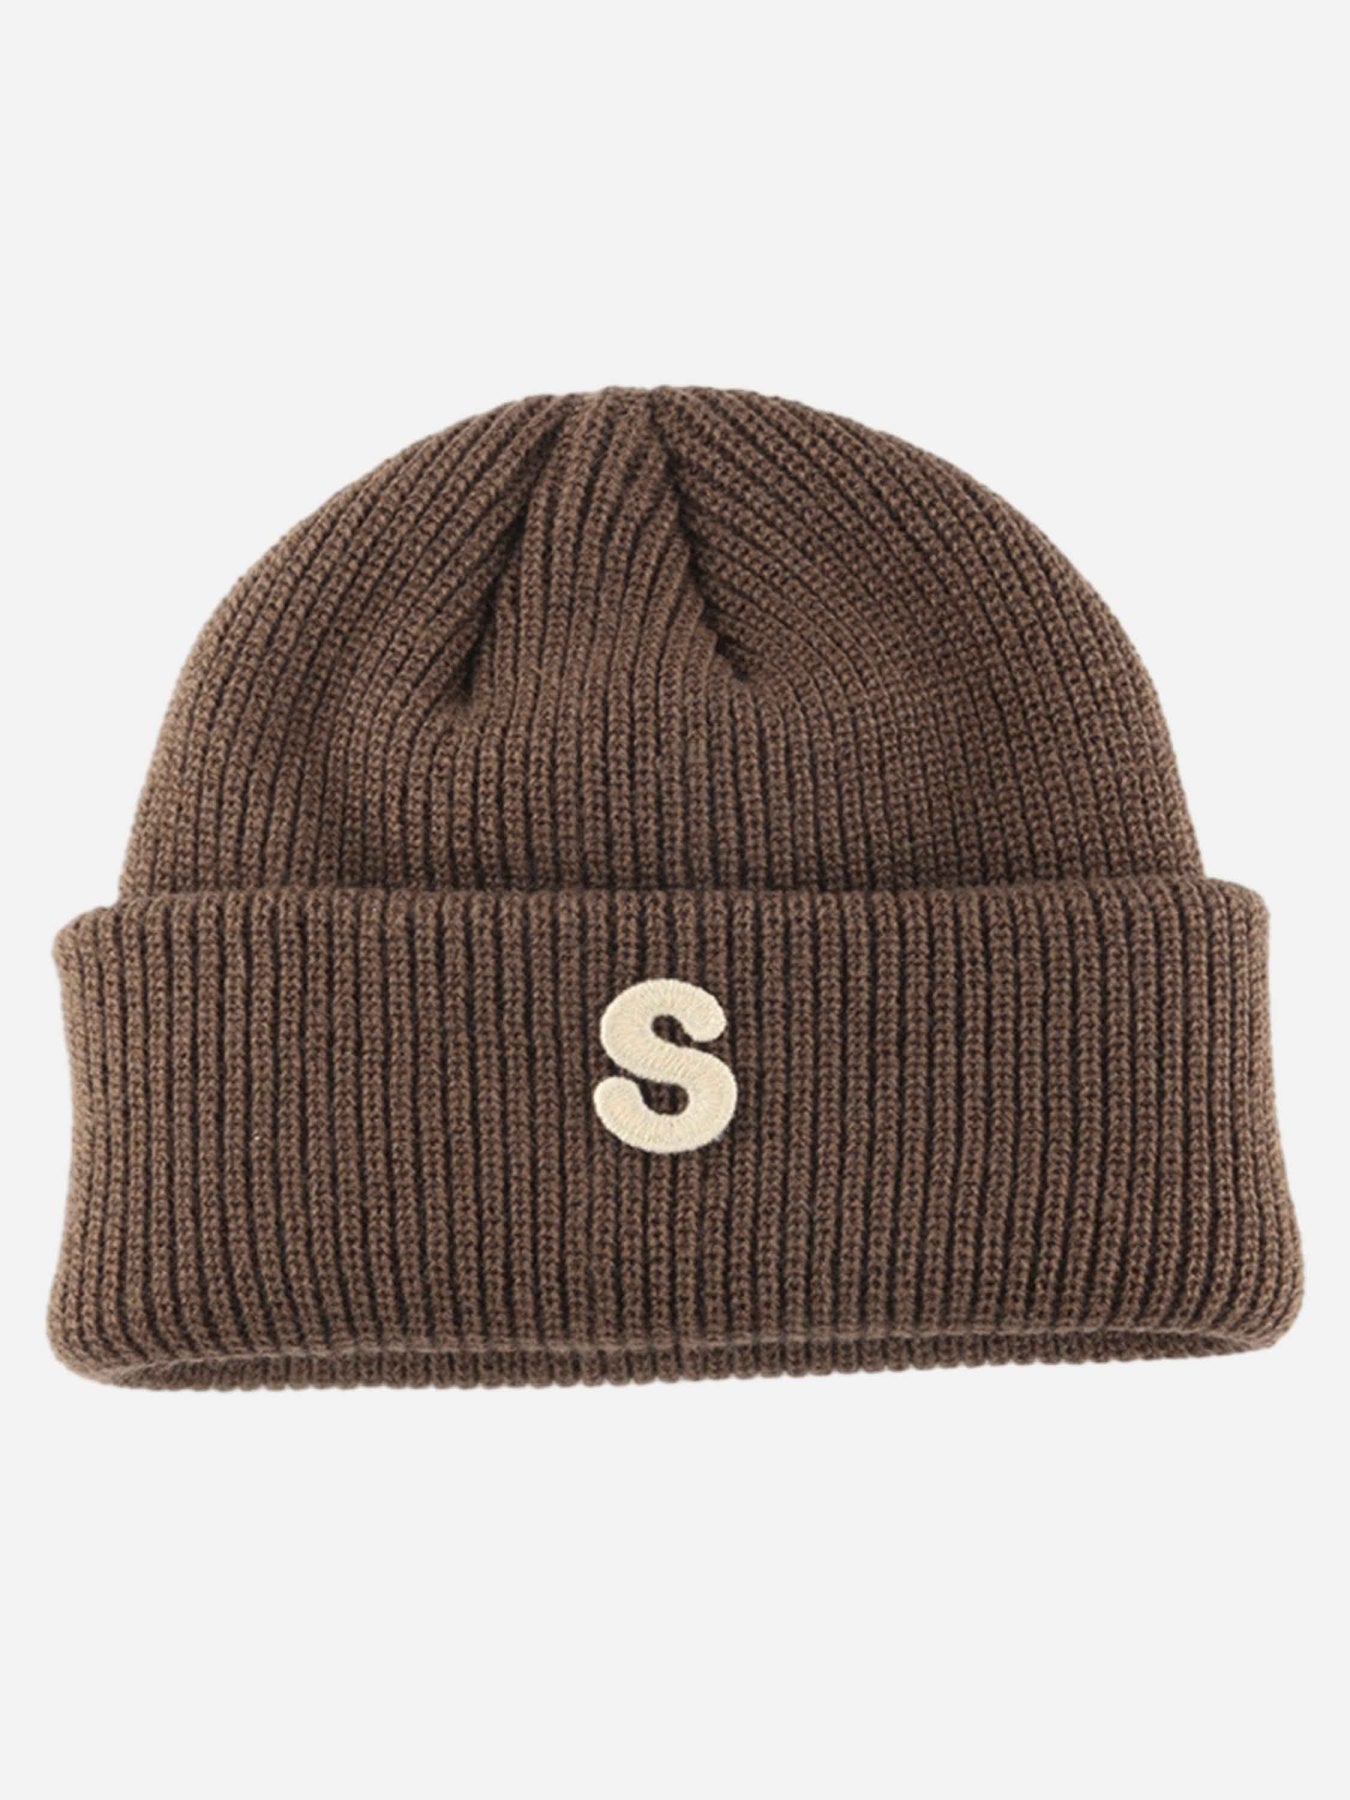 Thesupermade Letter S Embroidered Knit Cap